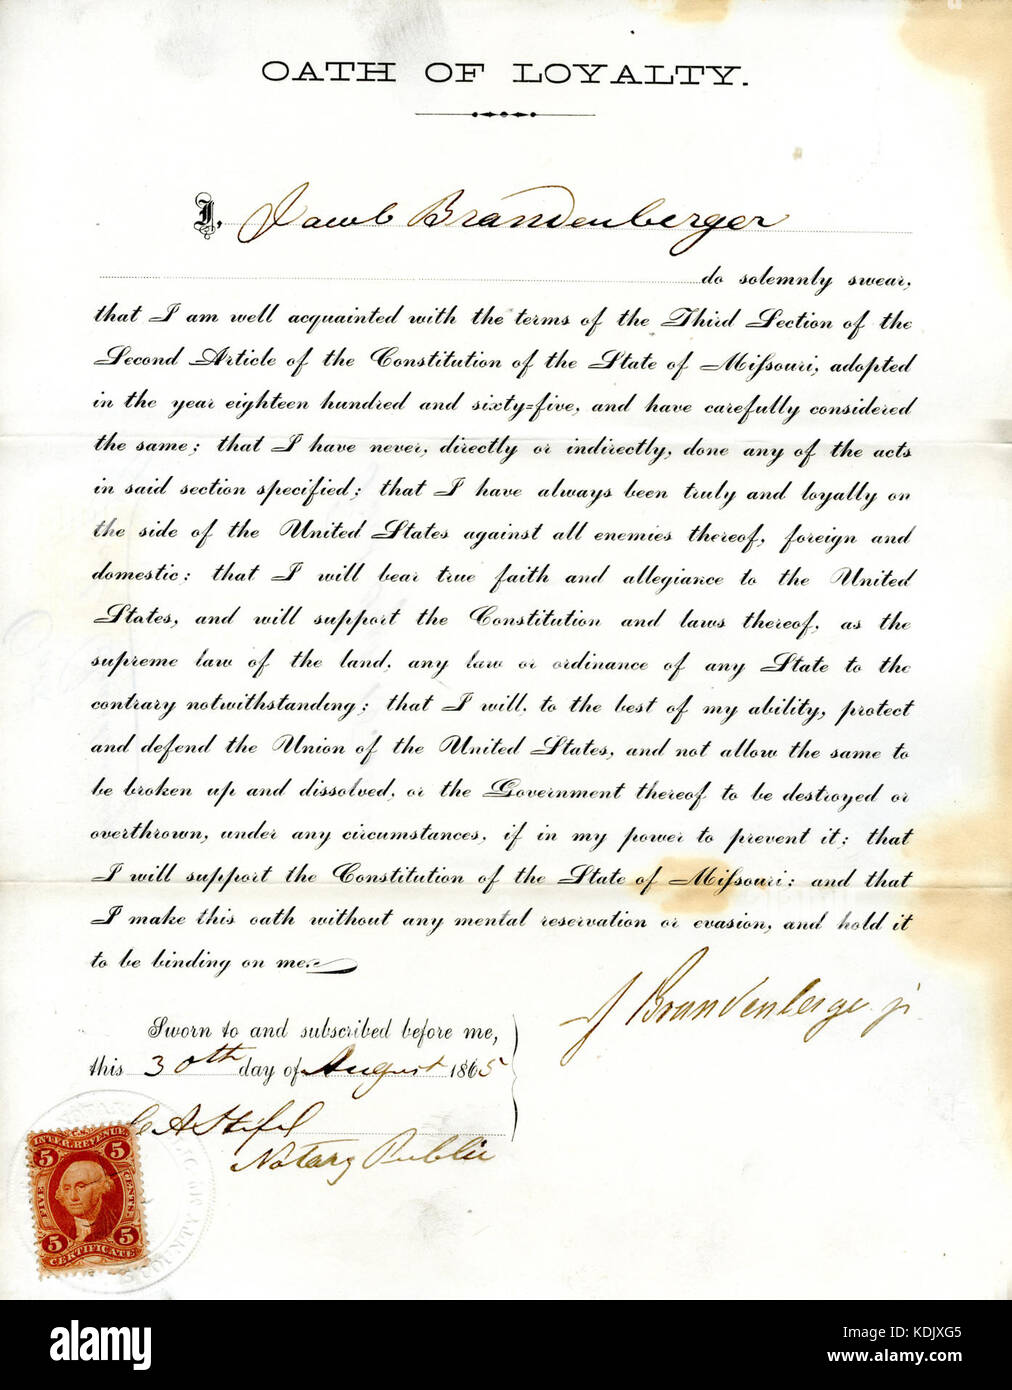 Loyalty oath of Jacob Brandenberger of Missouri, County of St. Louis Stock Photo